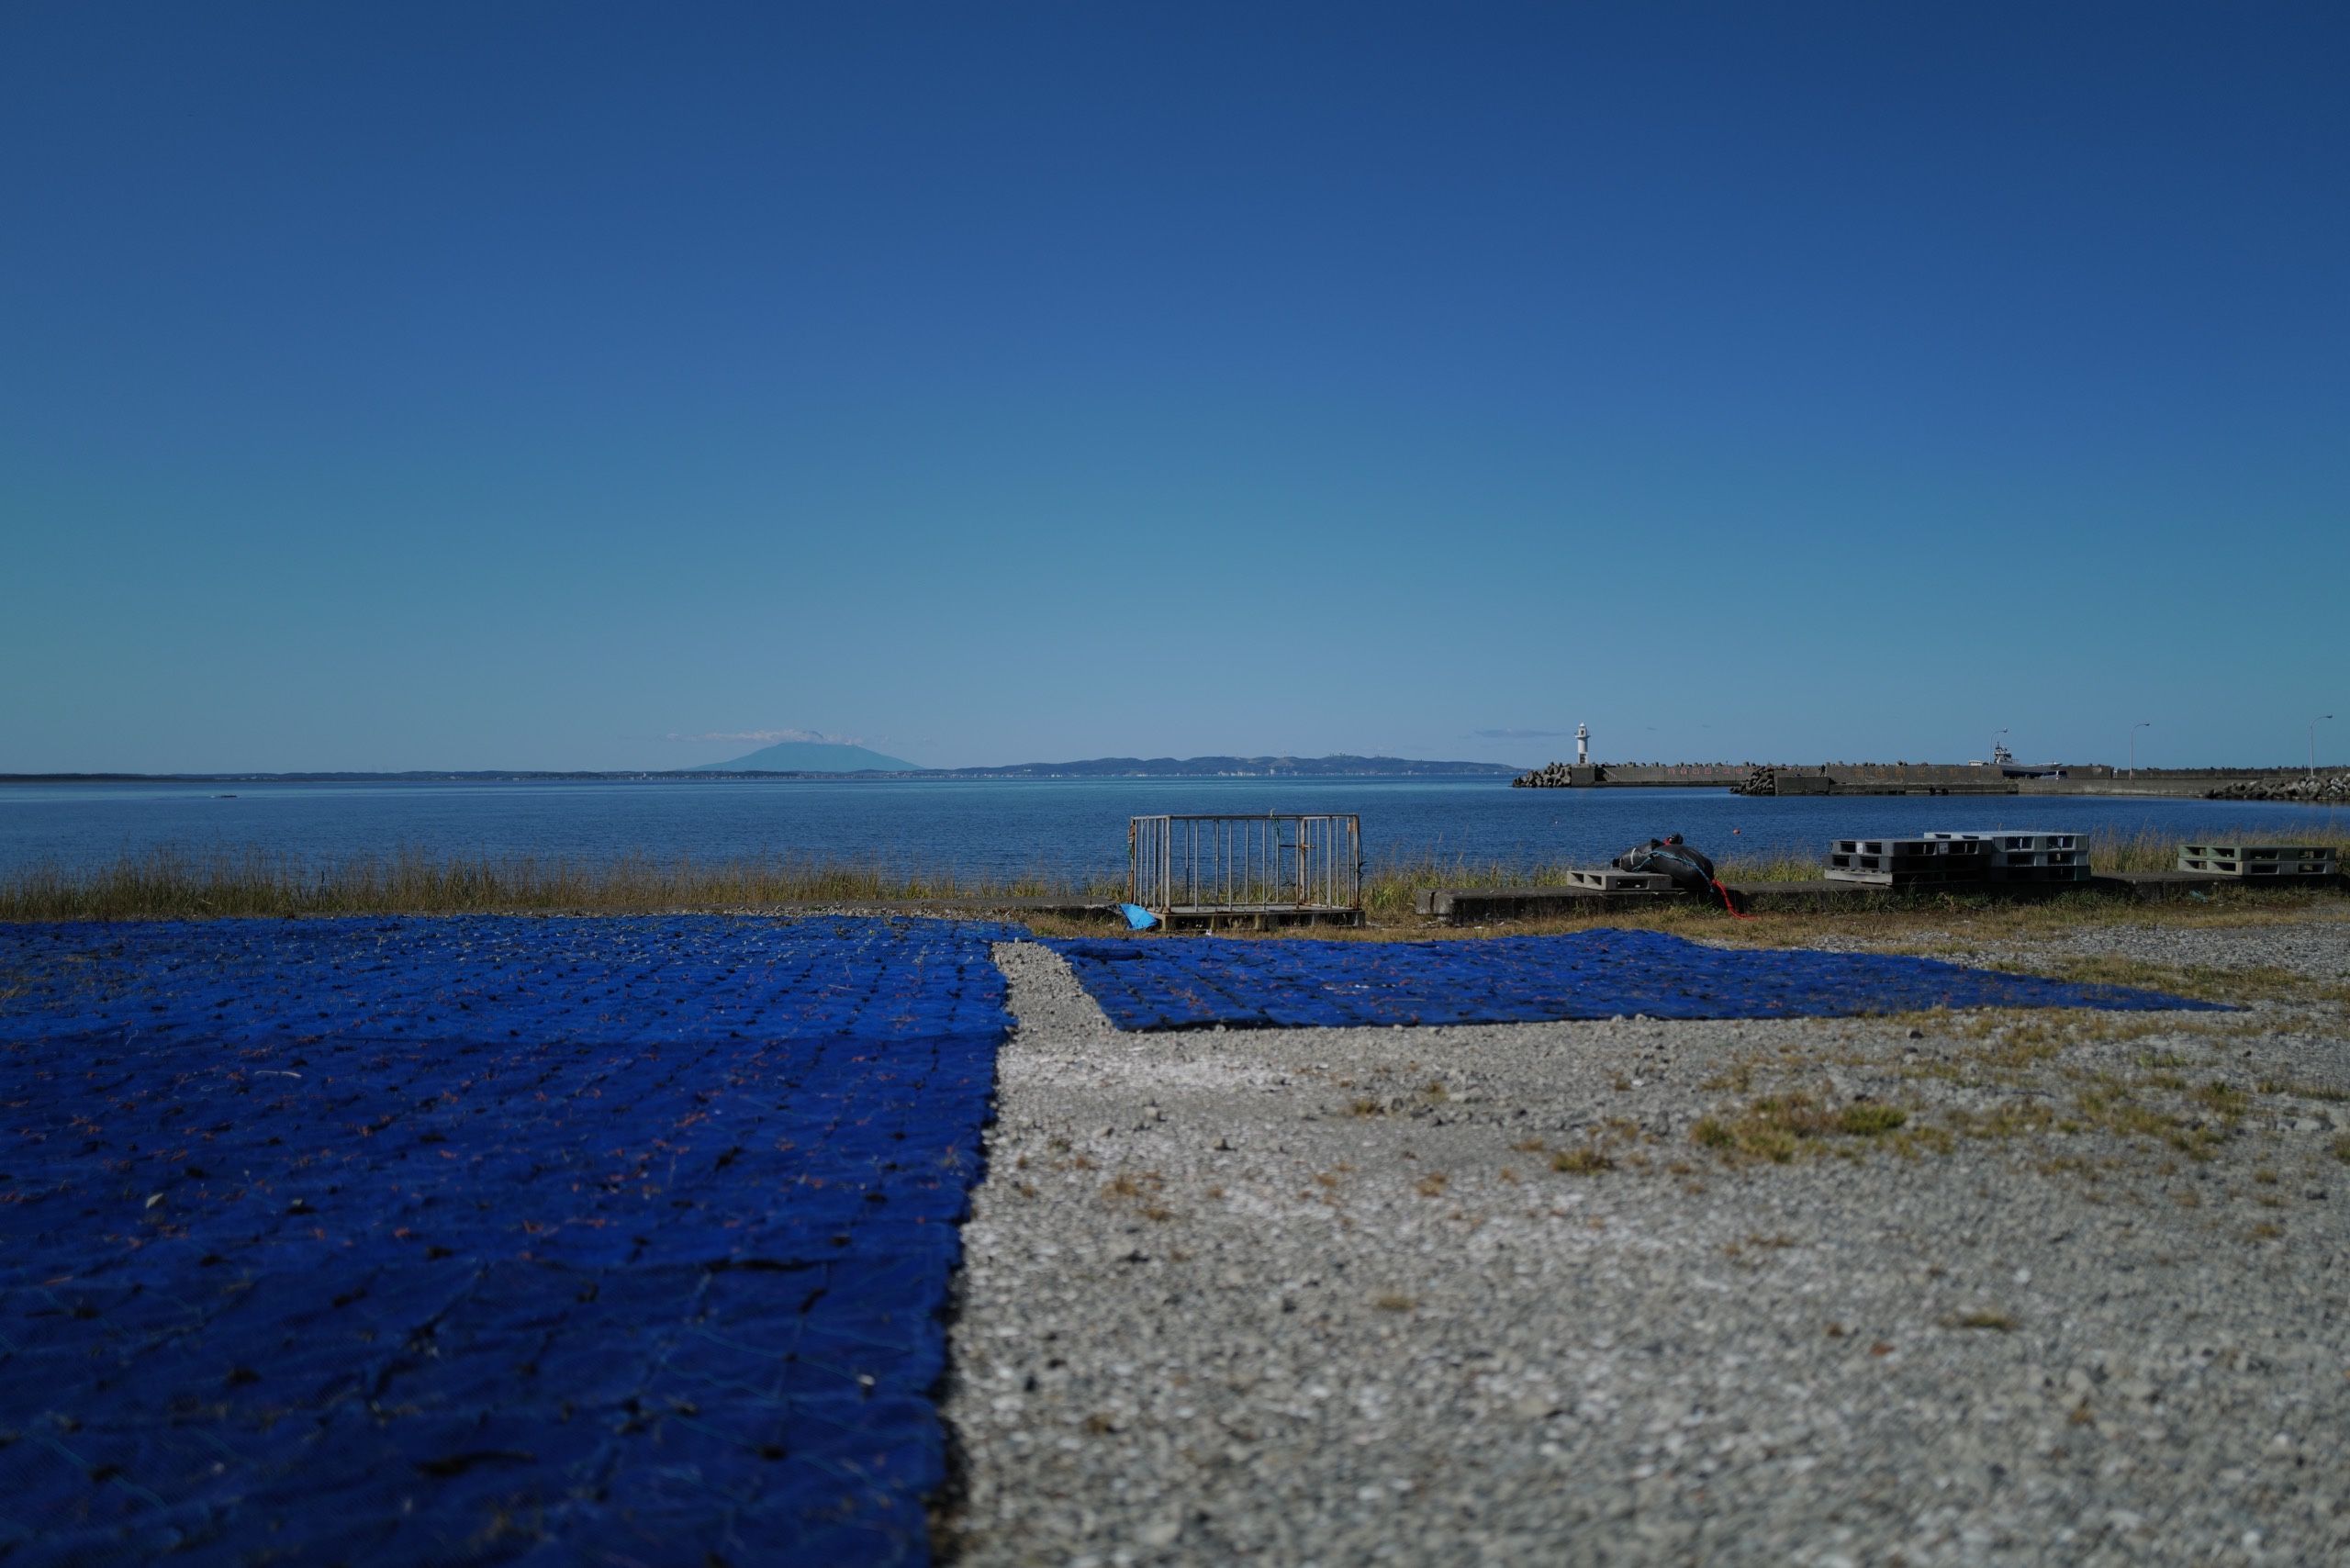 Behind a bay and a deep blue netting laid out to dry, a volcano, Rishiri, is seen on the horizon